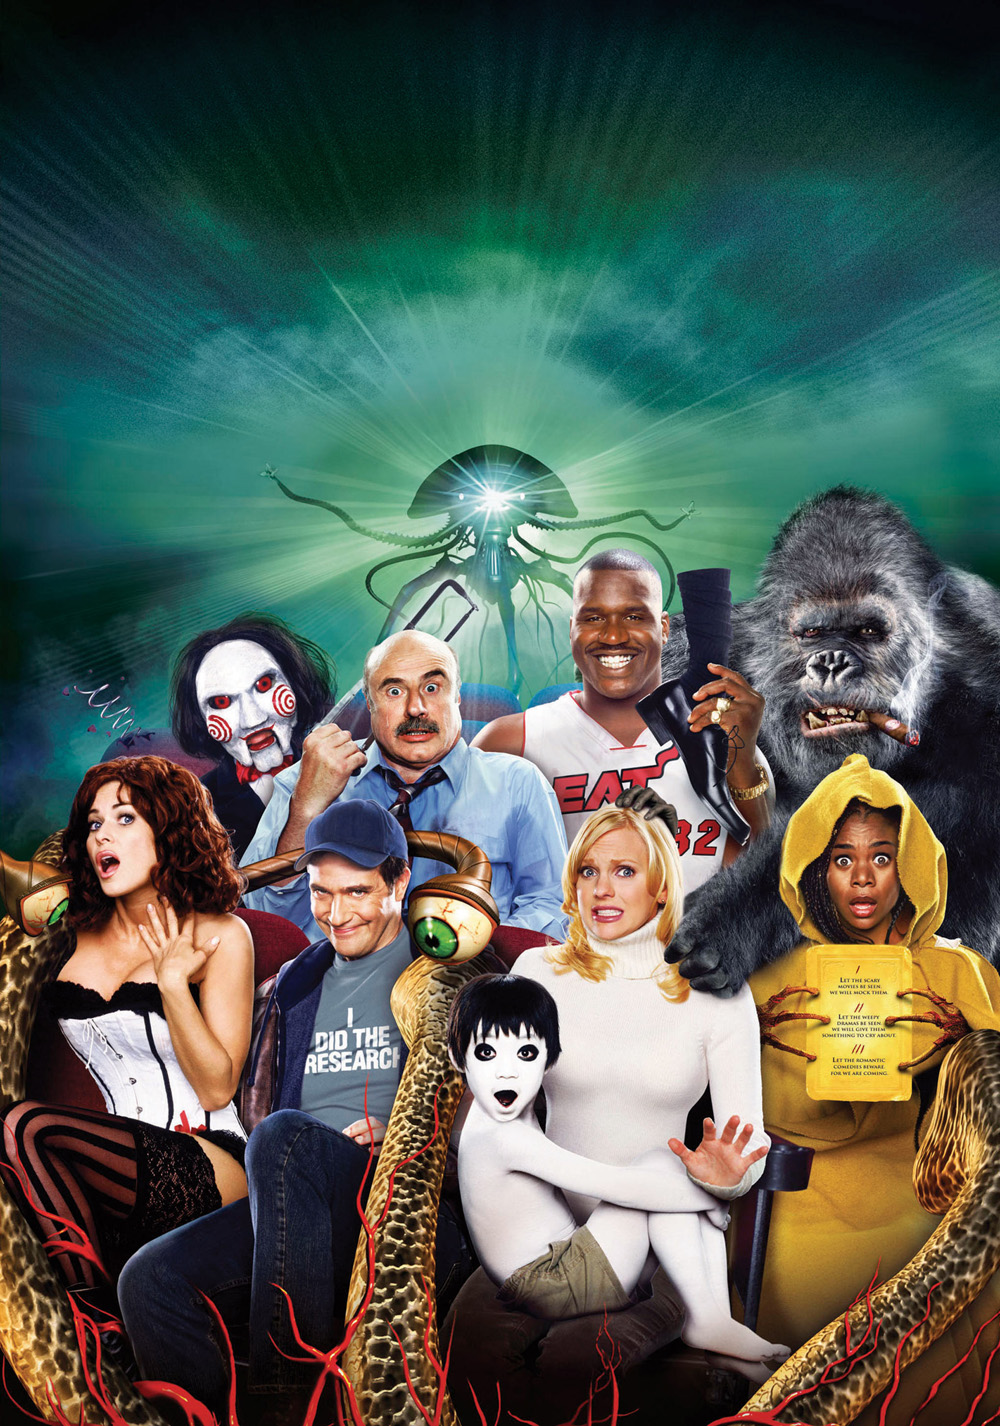 scary movie 4 wallpaper